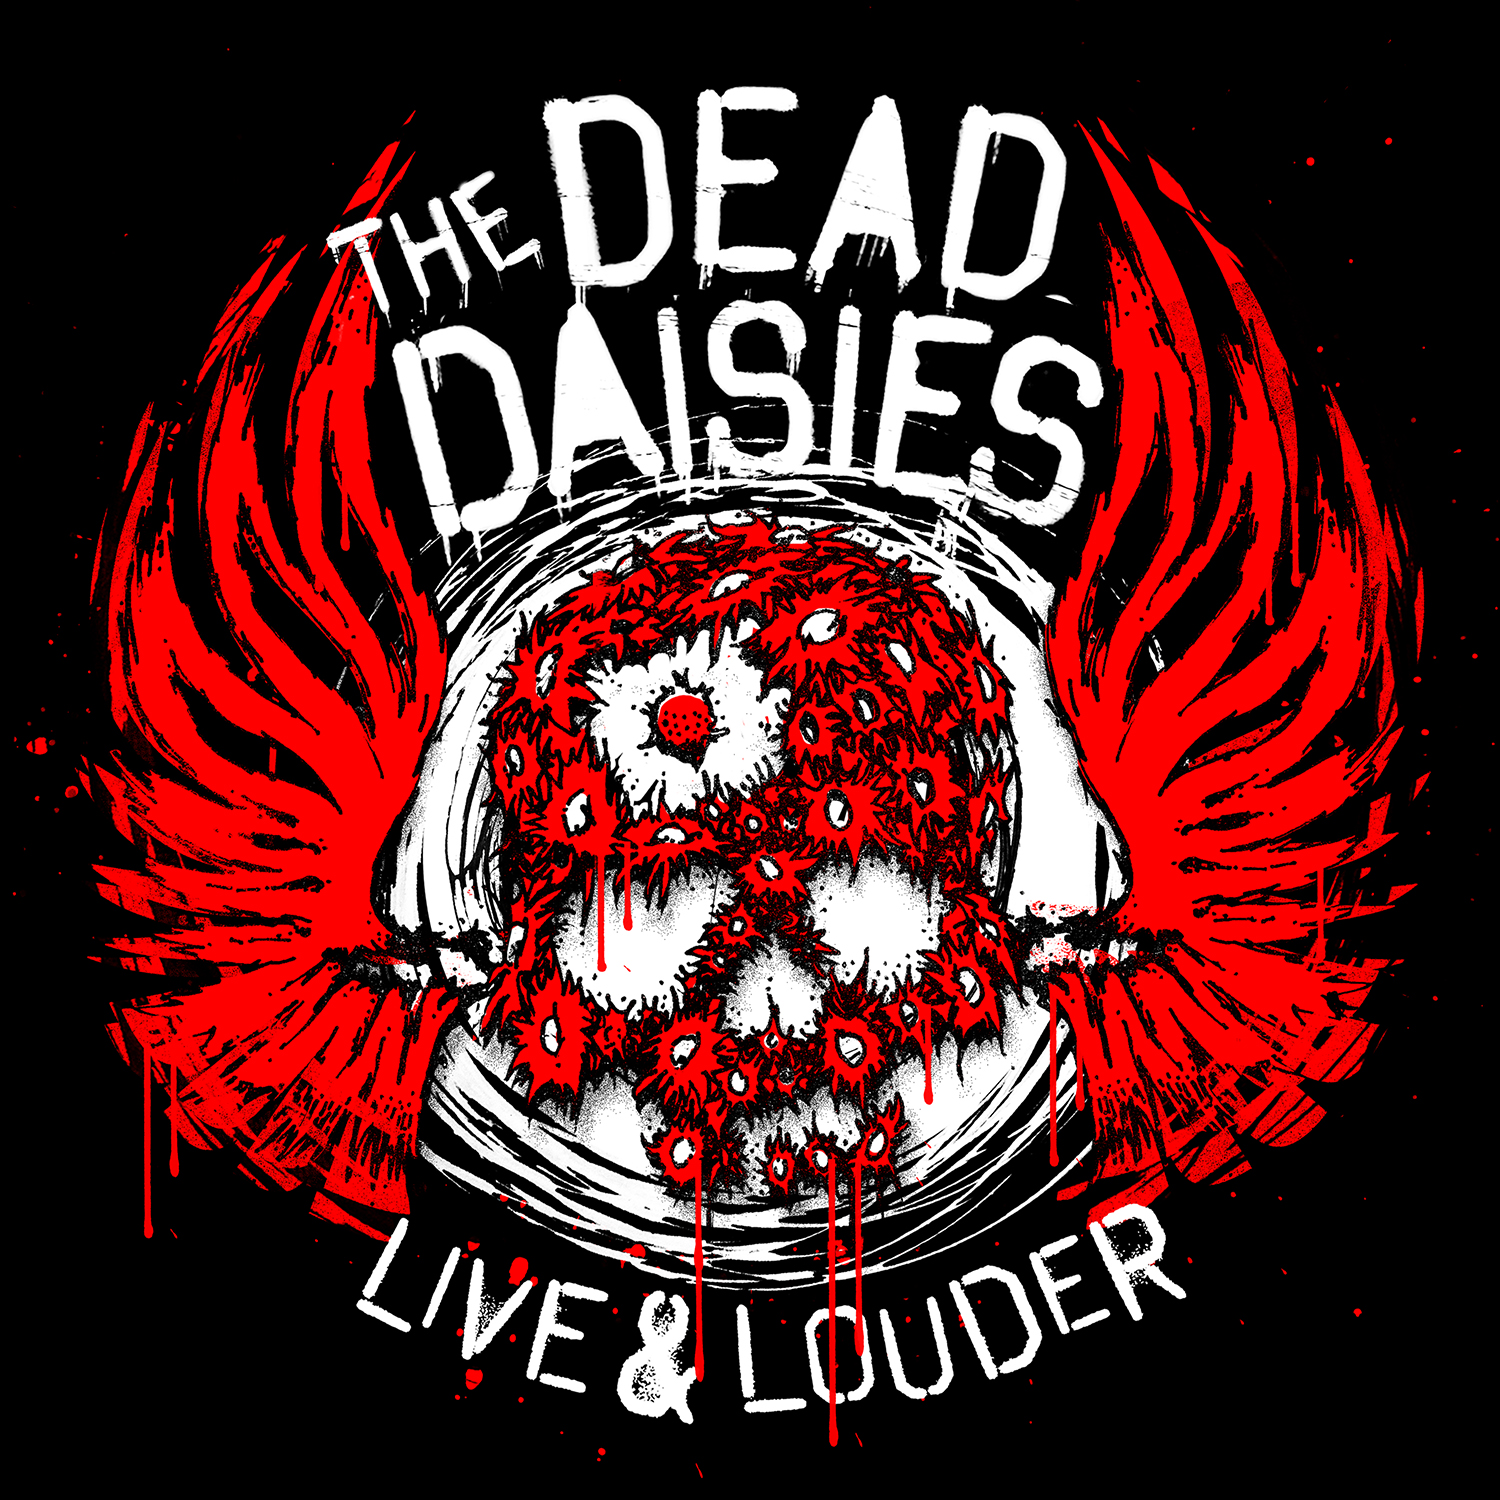 The Dead Daisies – Live & Louder